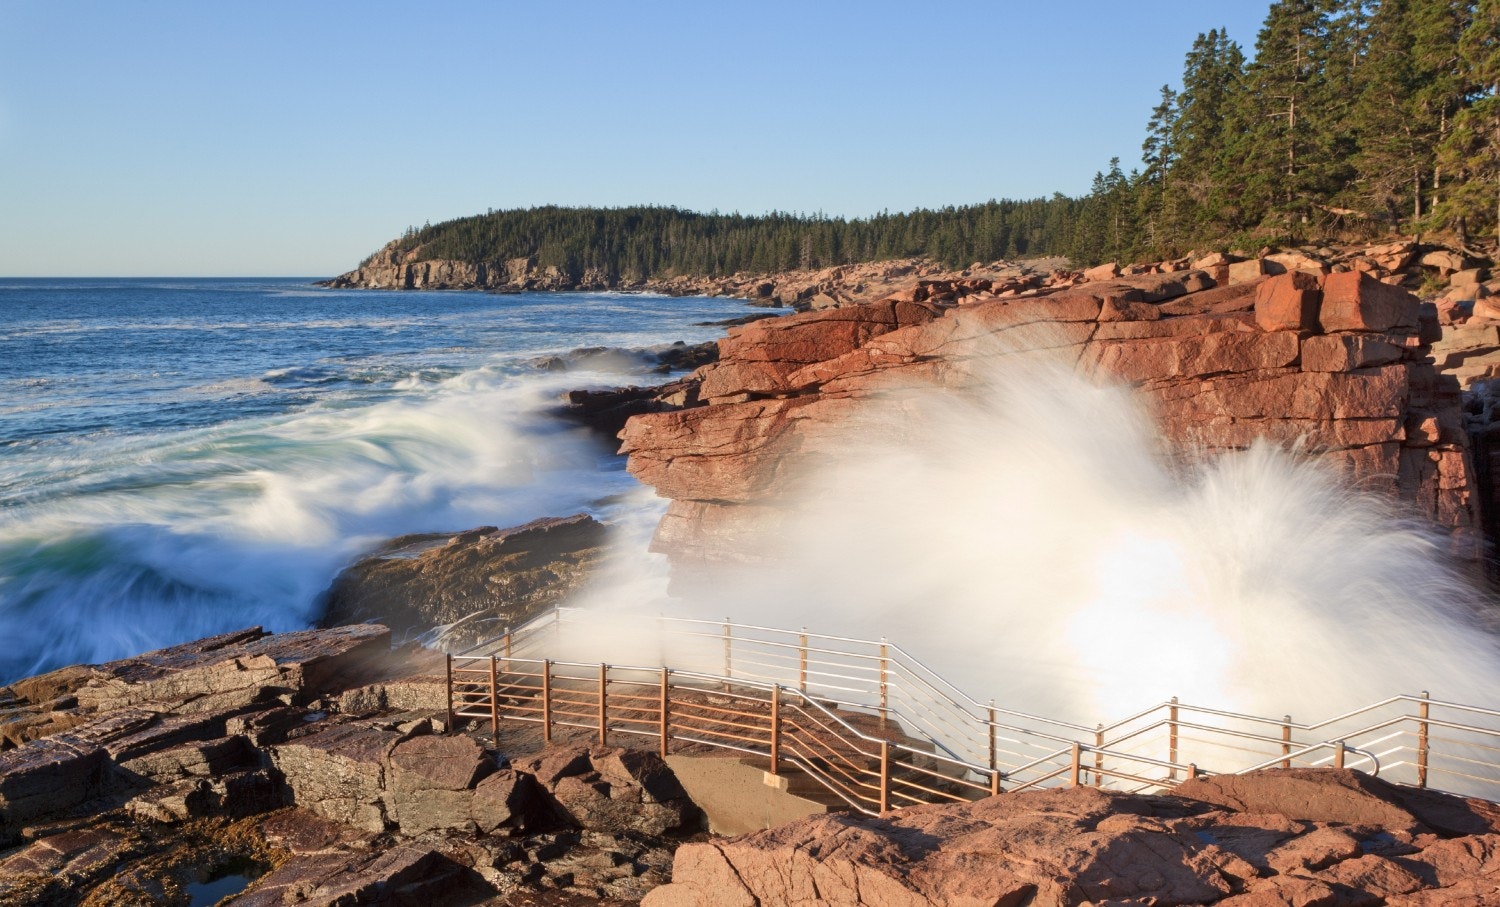 Water erupts from a thunder hole in Acadia National Park